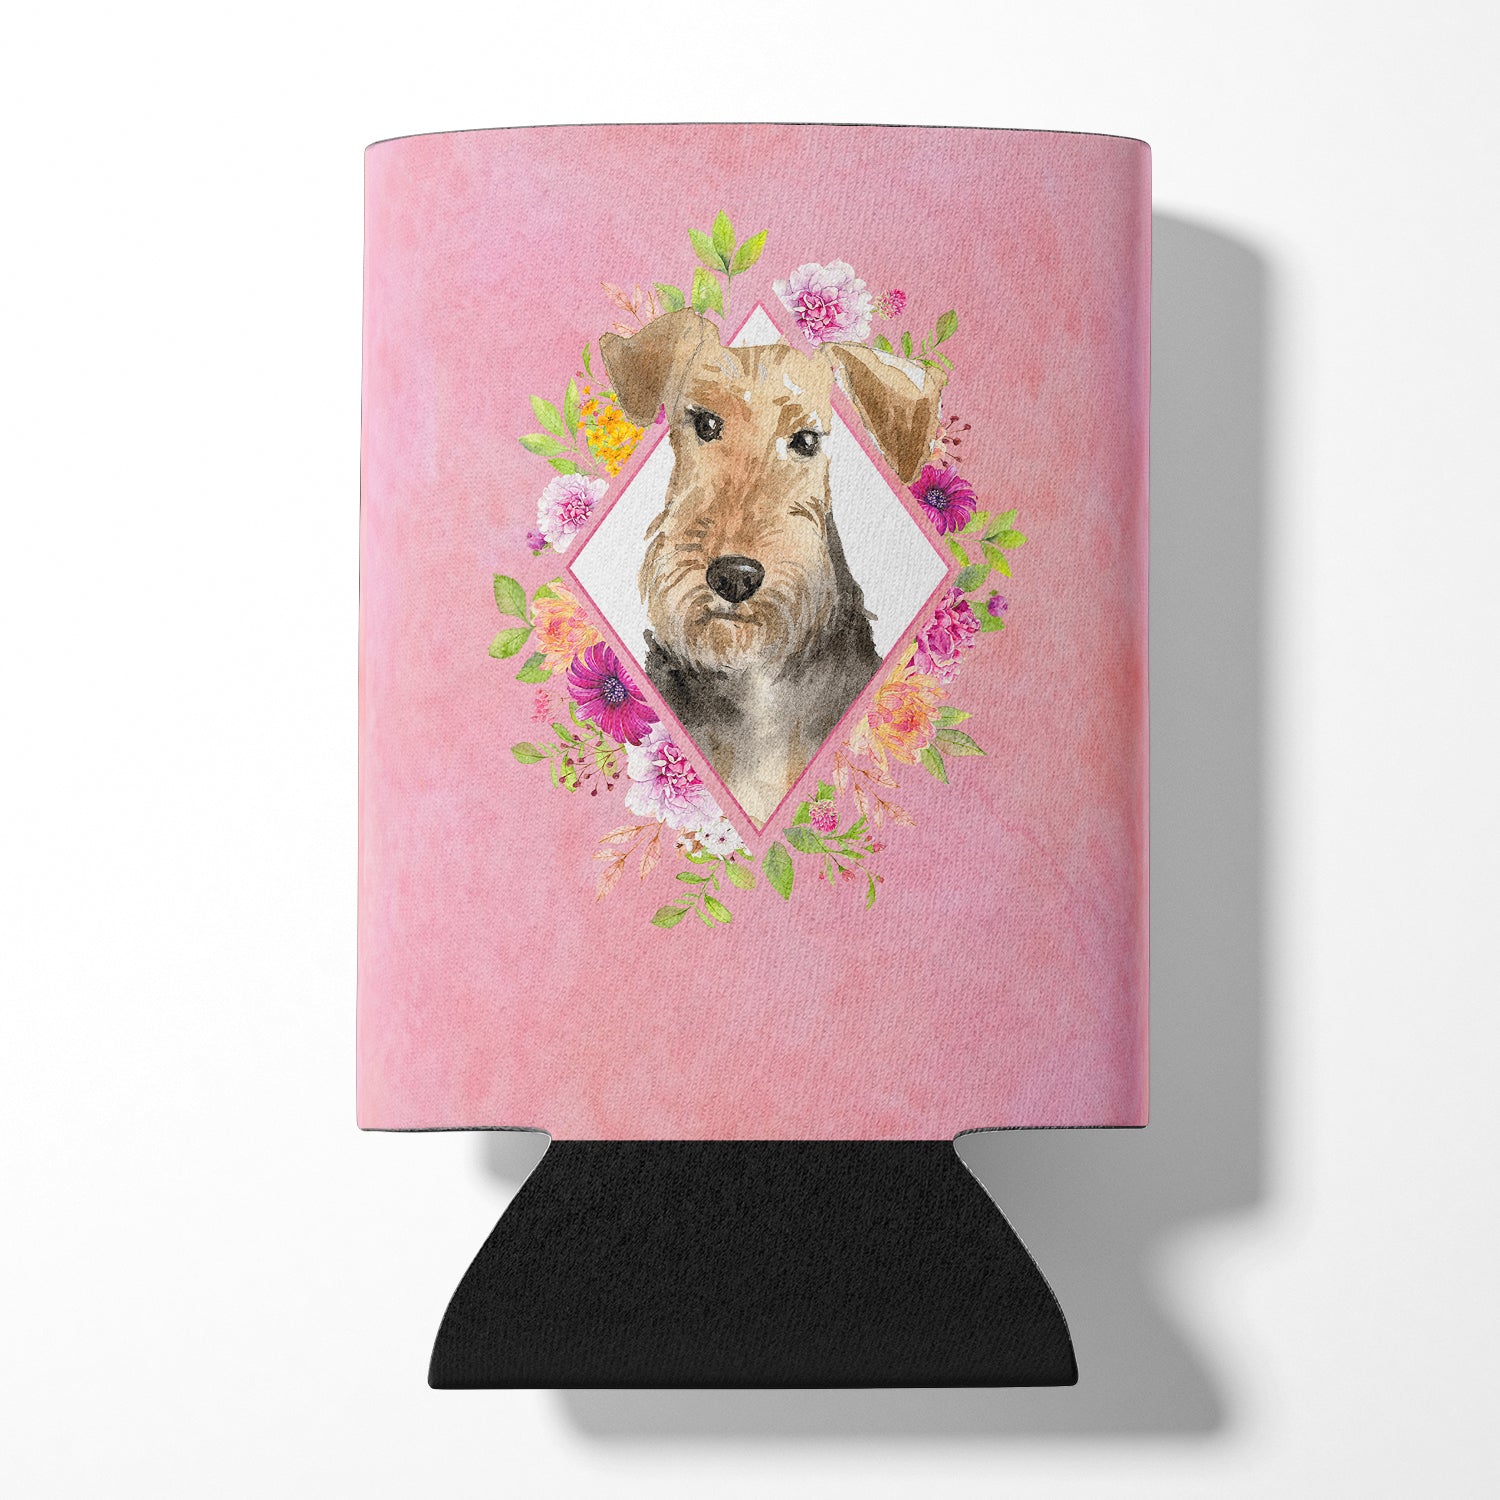 Airedale Terrier Pink Flowers Can or Bottle Hugger CK4204CC